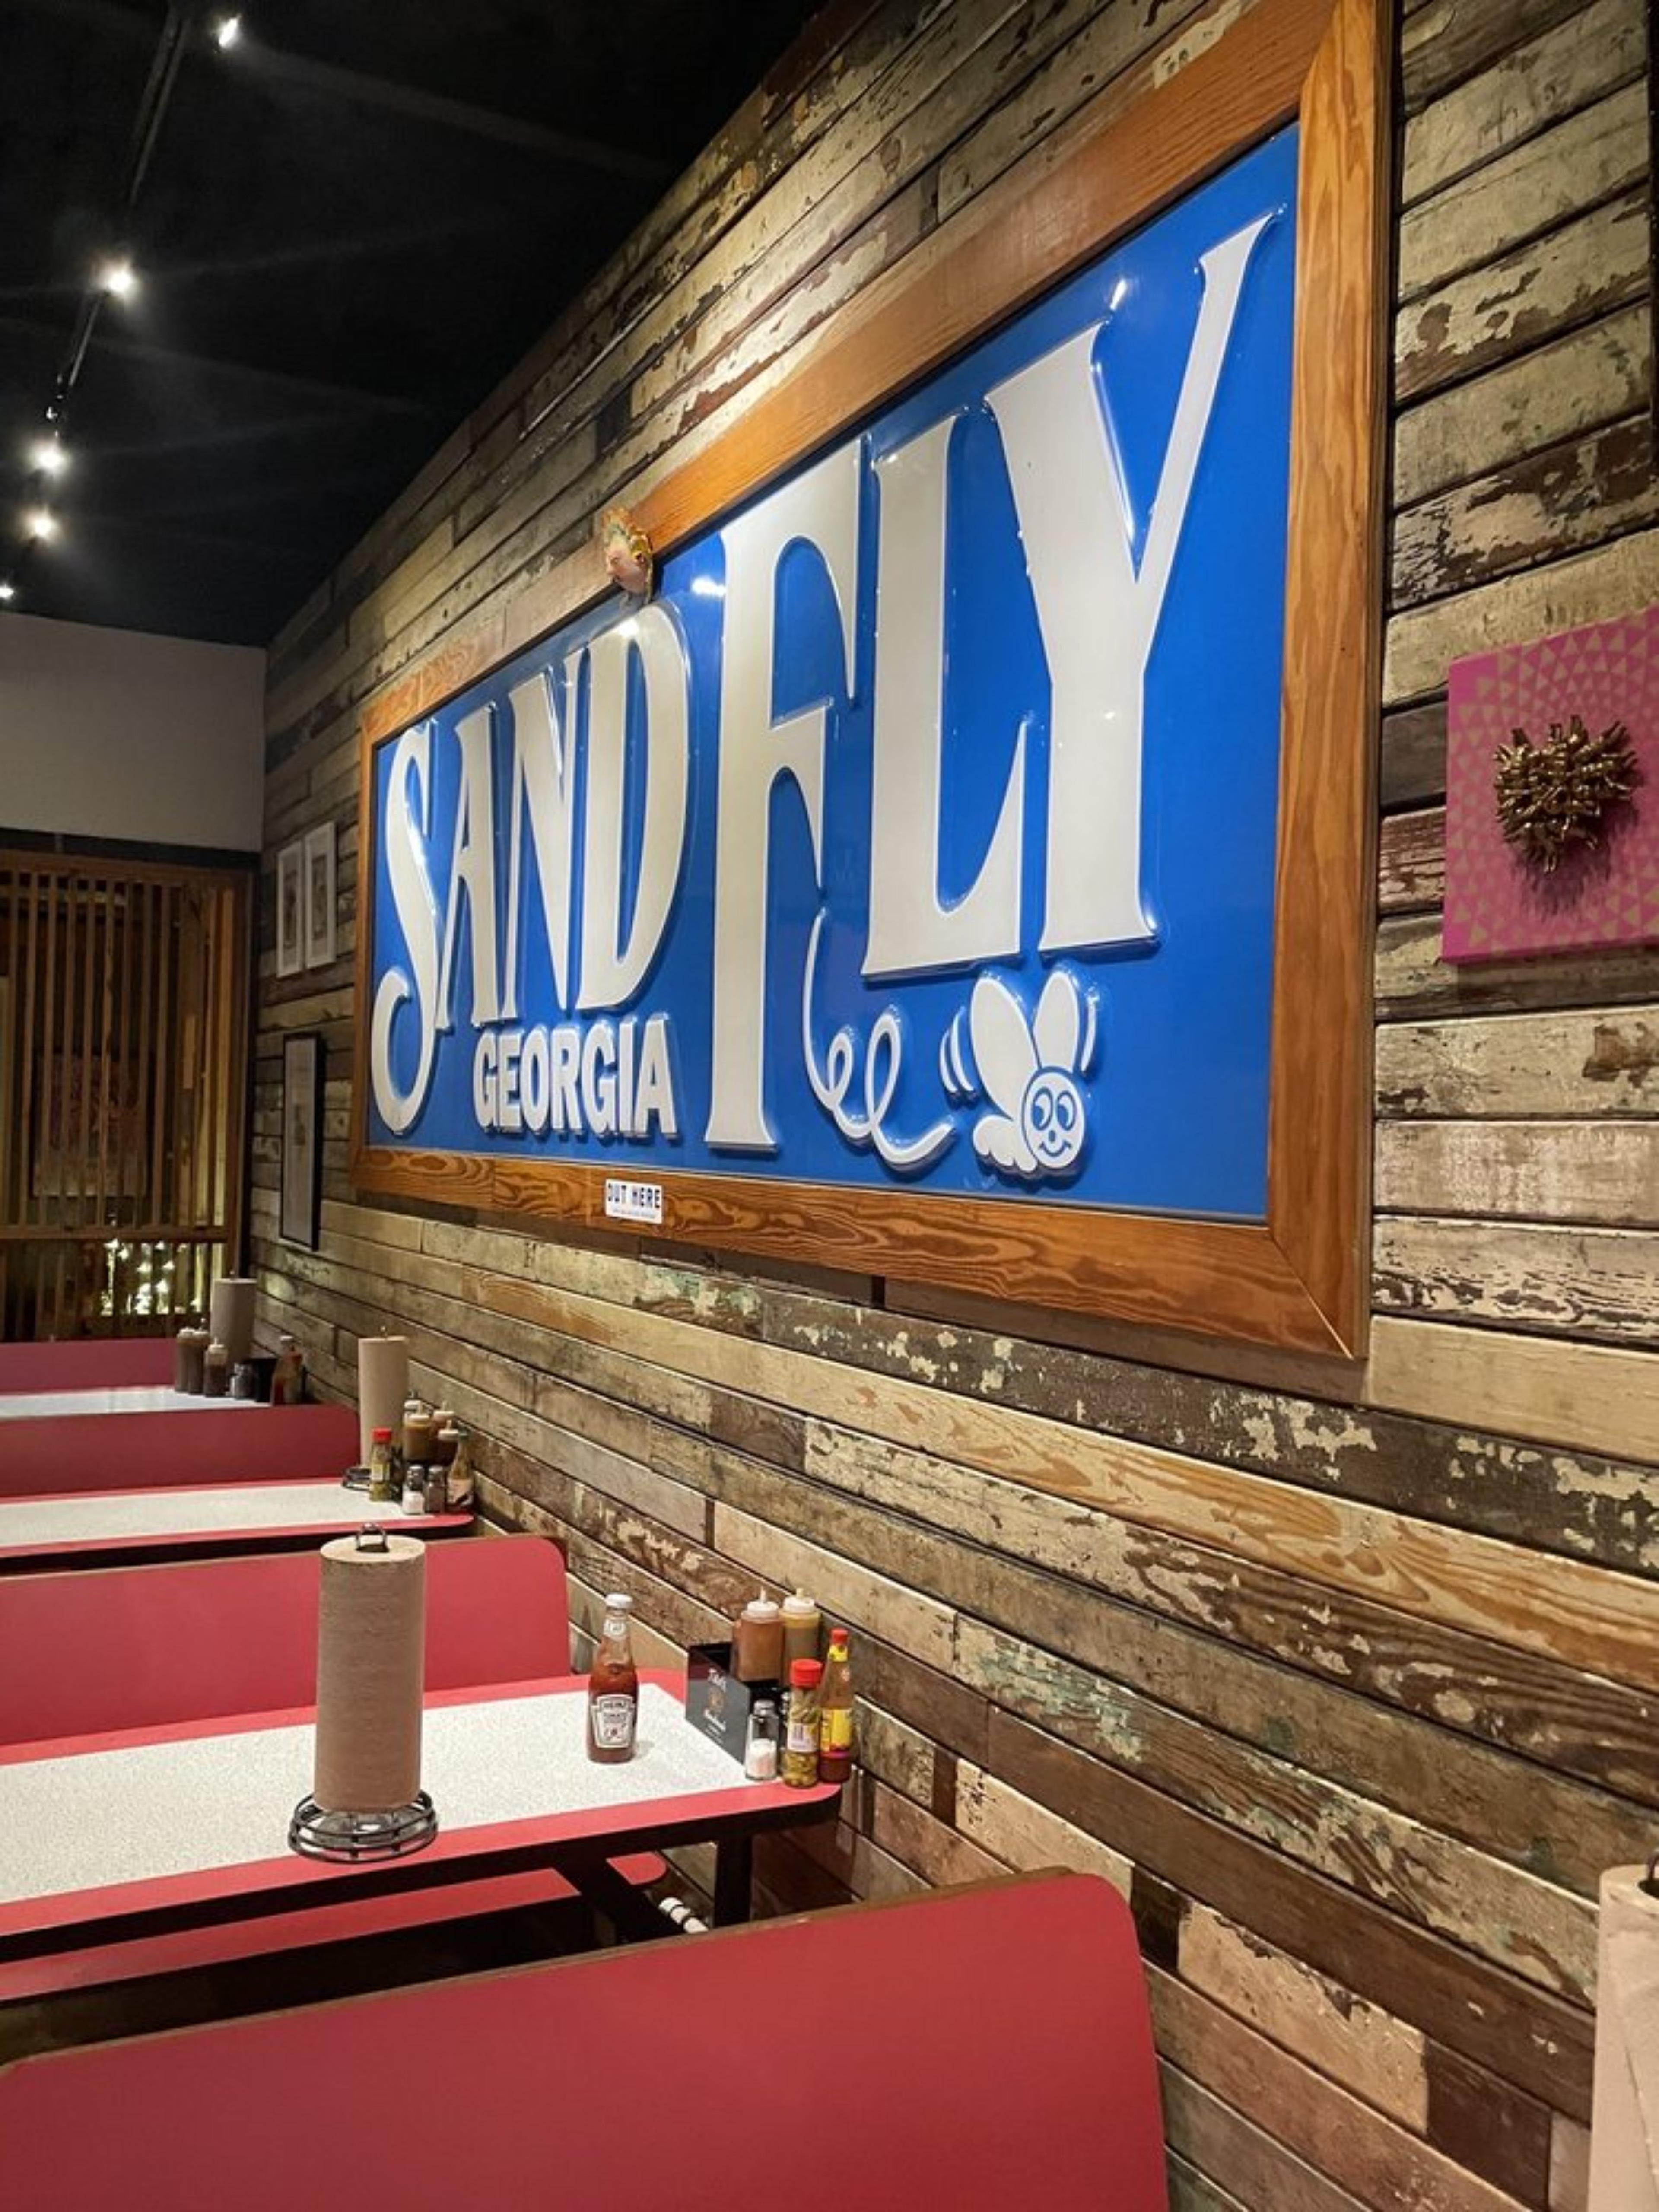 Sandfly Barbeque